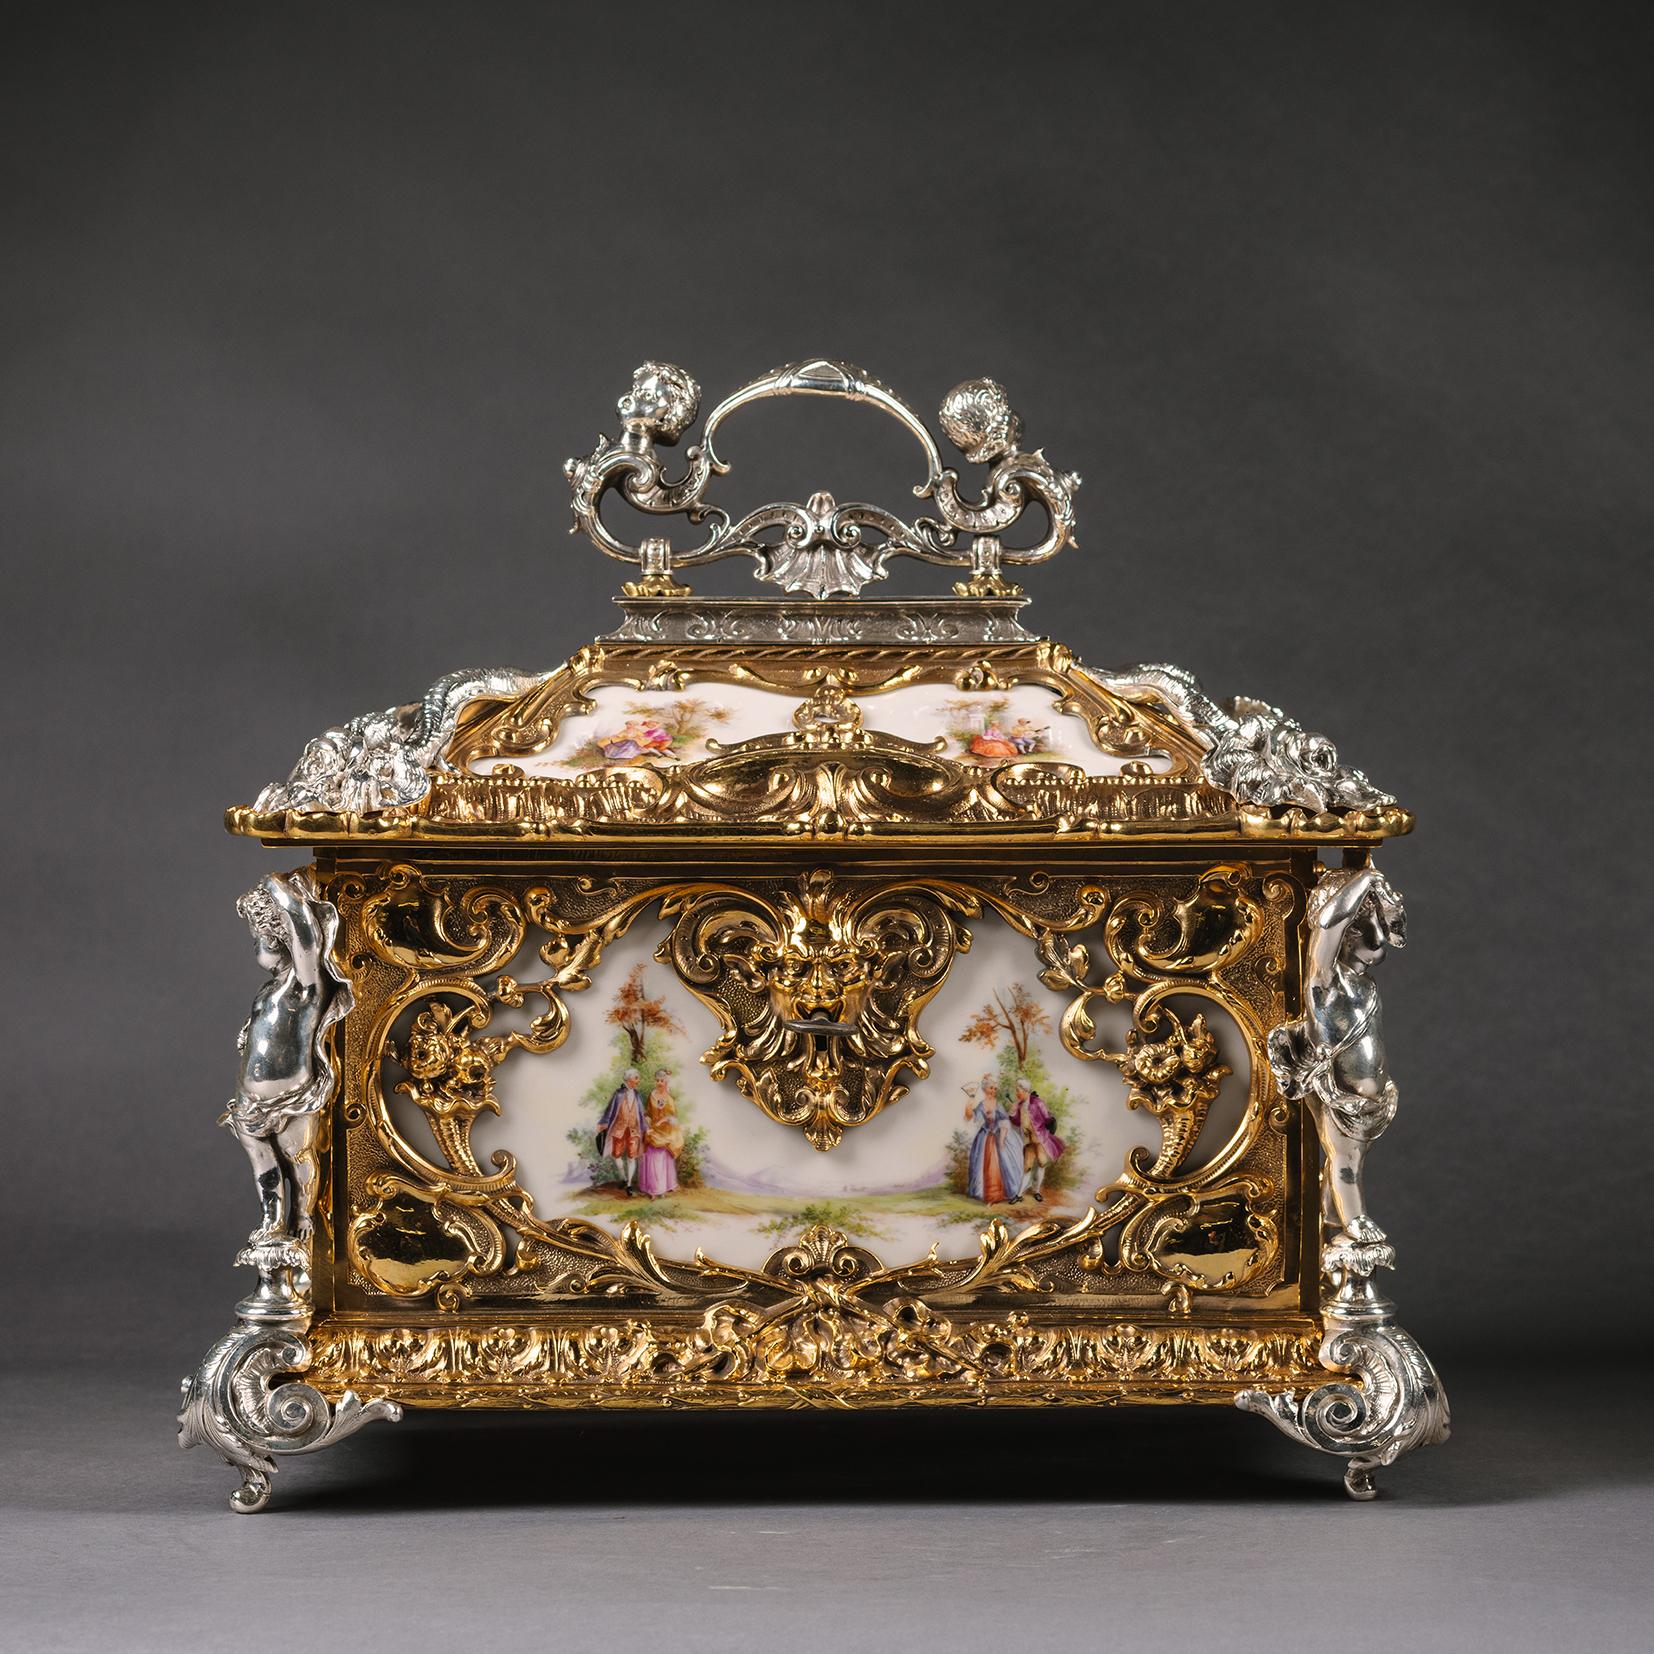 A Fine Gilt and Silvered Bronze Porcelain Inset Casket.

This casket of large proportions has gilt and silvered bronze sculptural mounts. The porcelain panels to the sides and to the top are finely painted with courting couples in eighteenth century